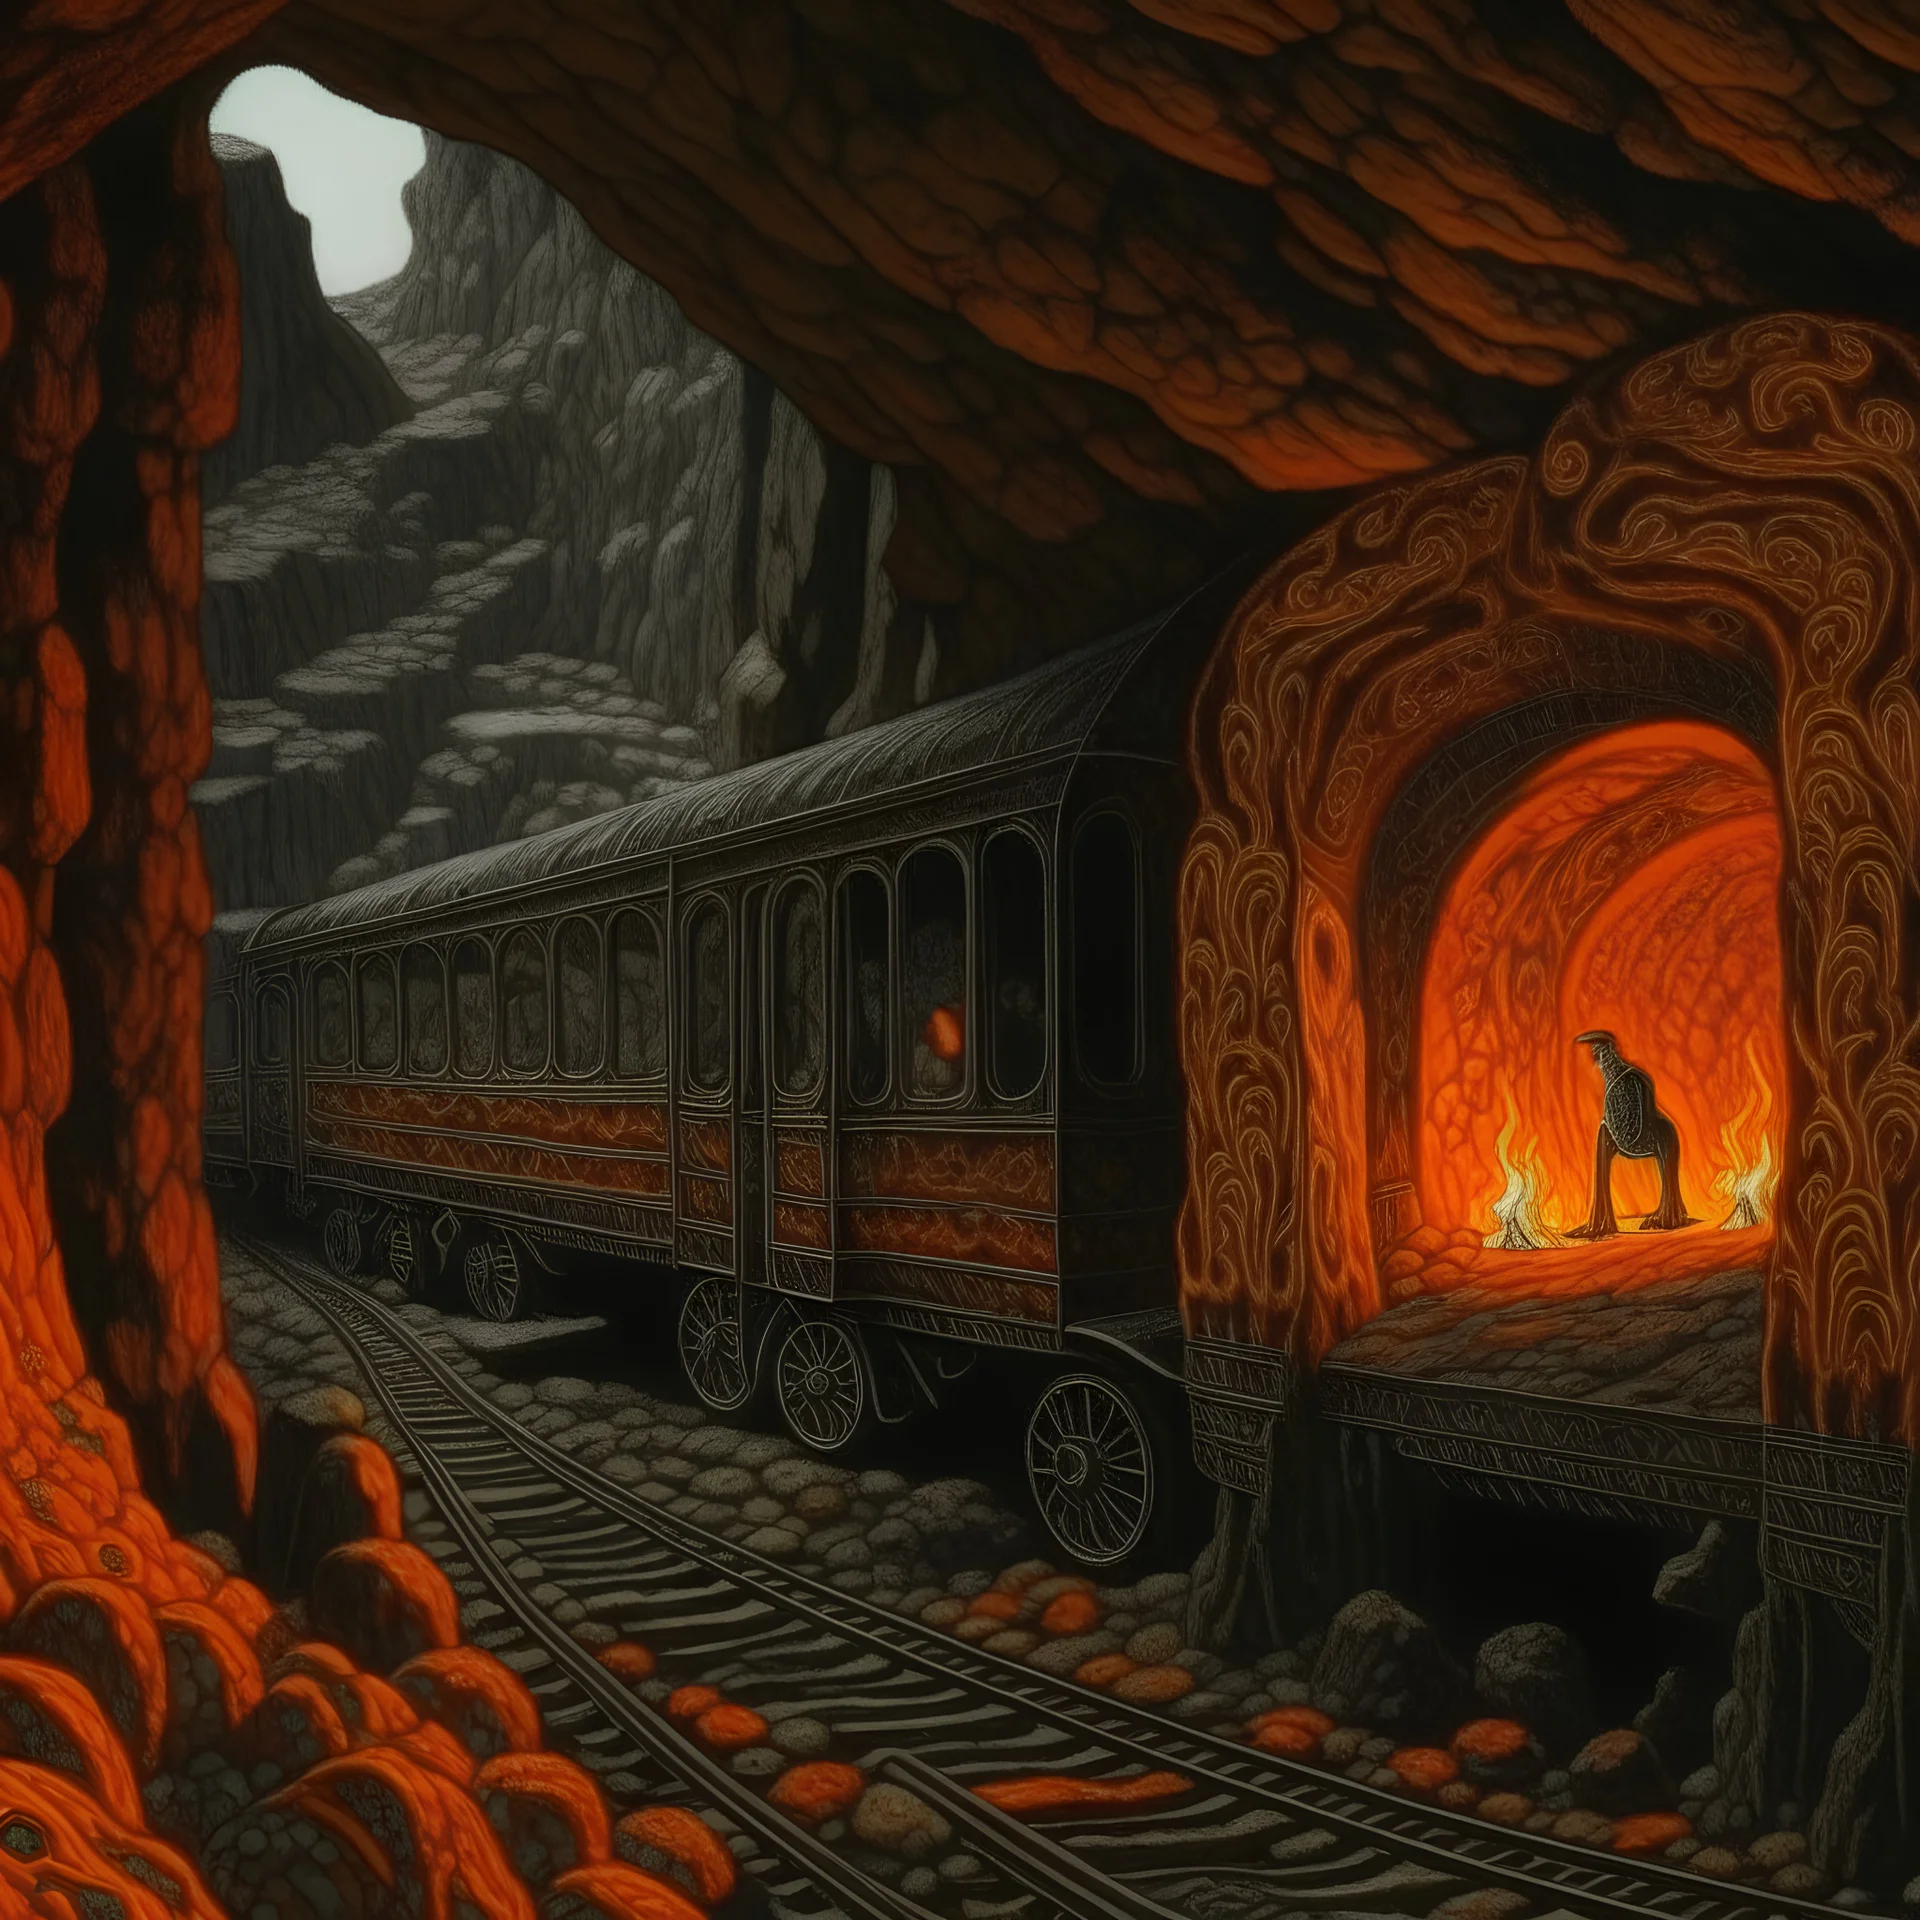 A gray train in a cavern filled with lava designed in native American petroglyphs painted by Paul Ranson